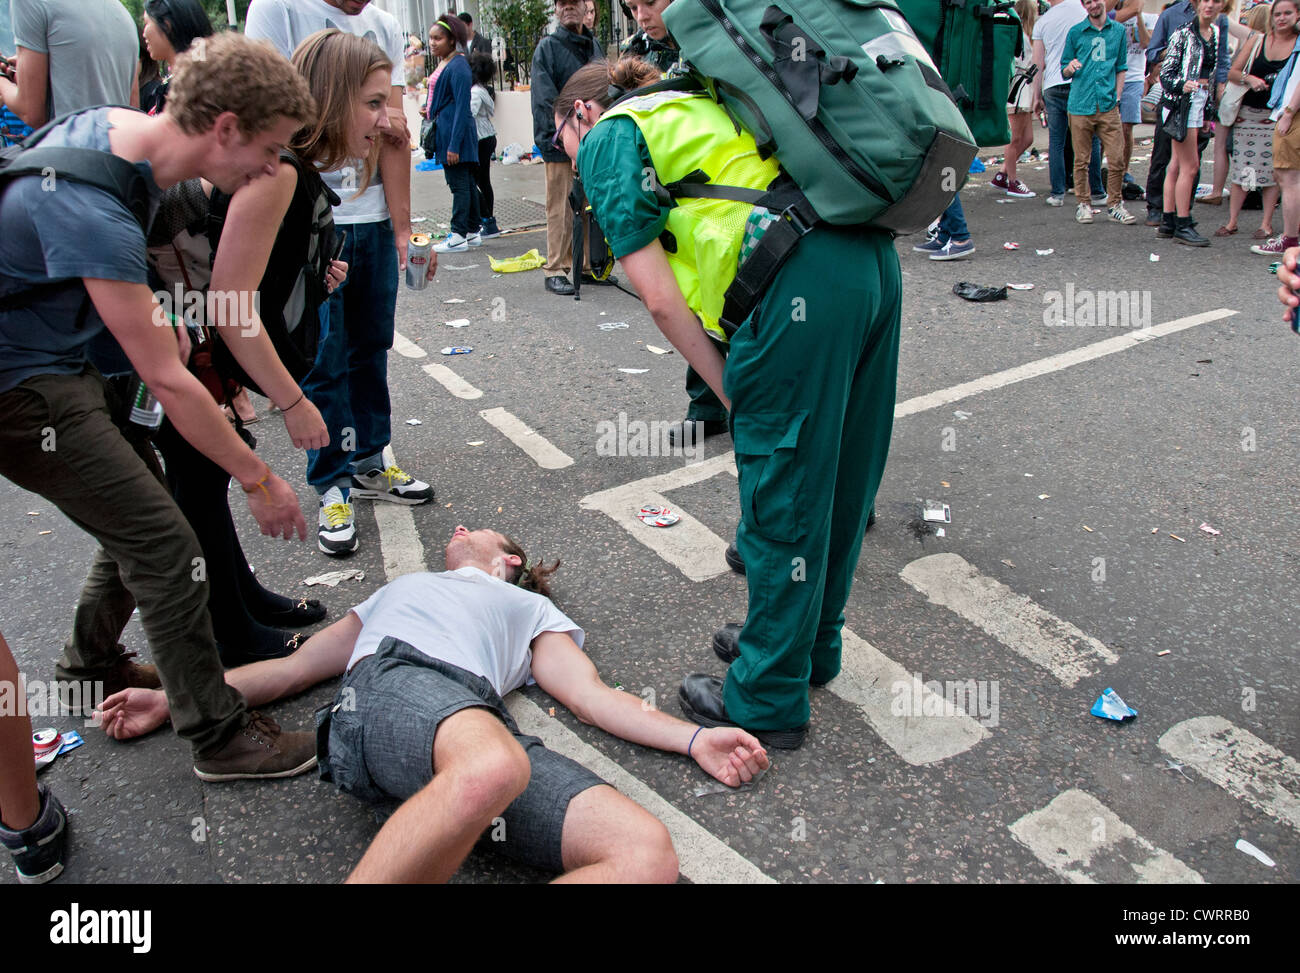 man lying on ground being approached by paramedics Stock Photo